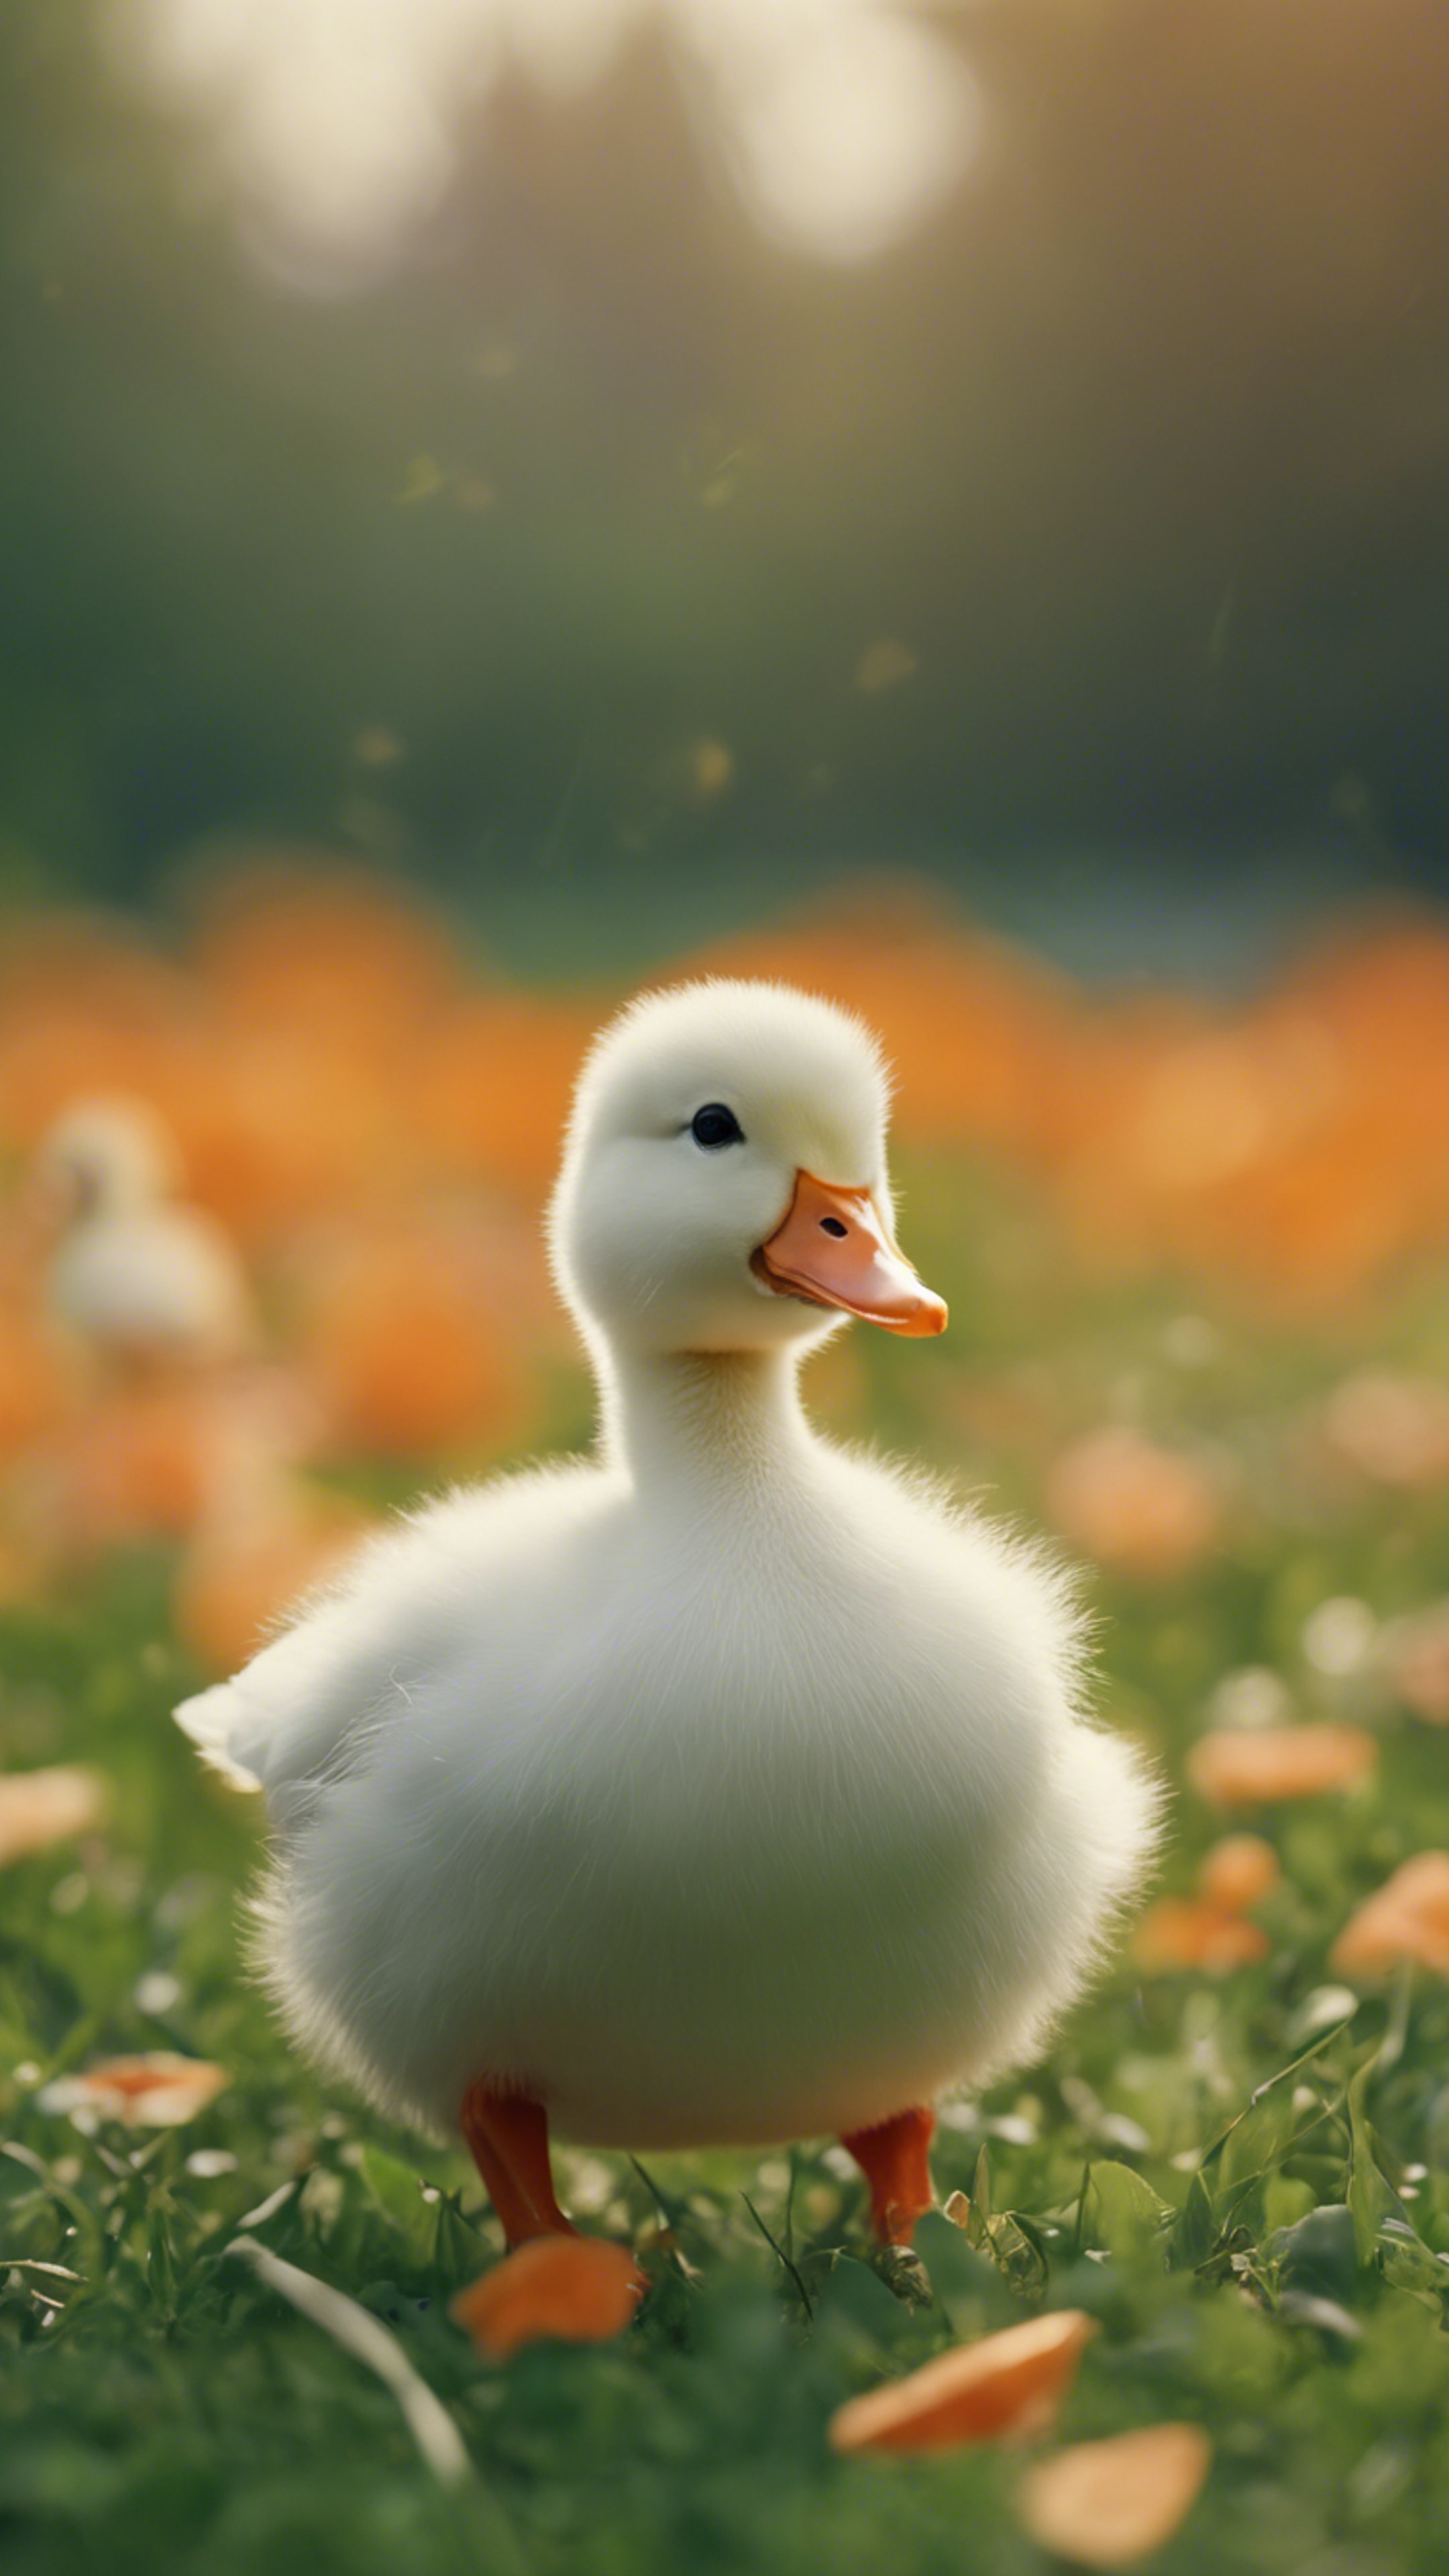 An adorable fluffy white duck with a bright orange bill is waddling happily across a green meadow. טפט[c976b0c80c1040dead0f]